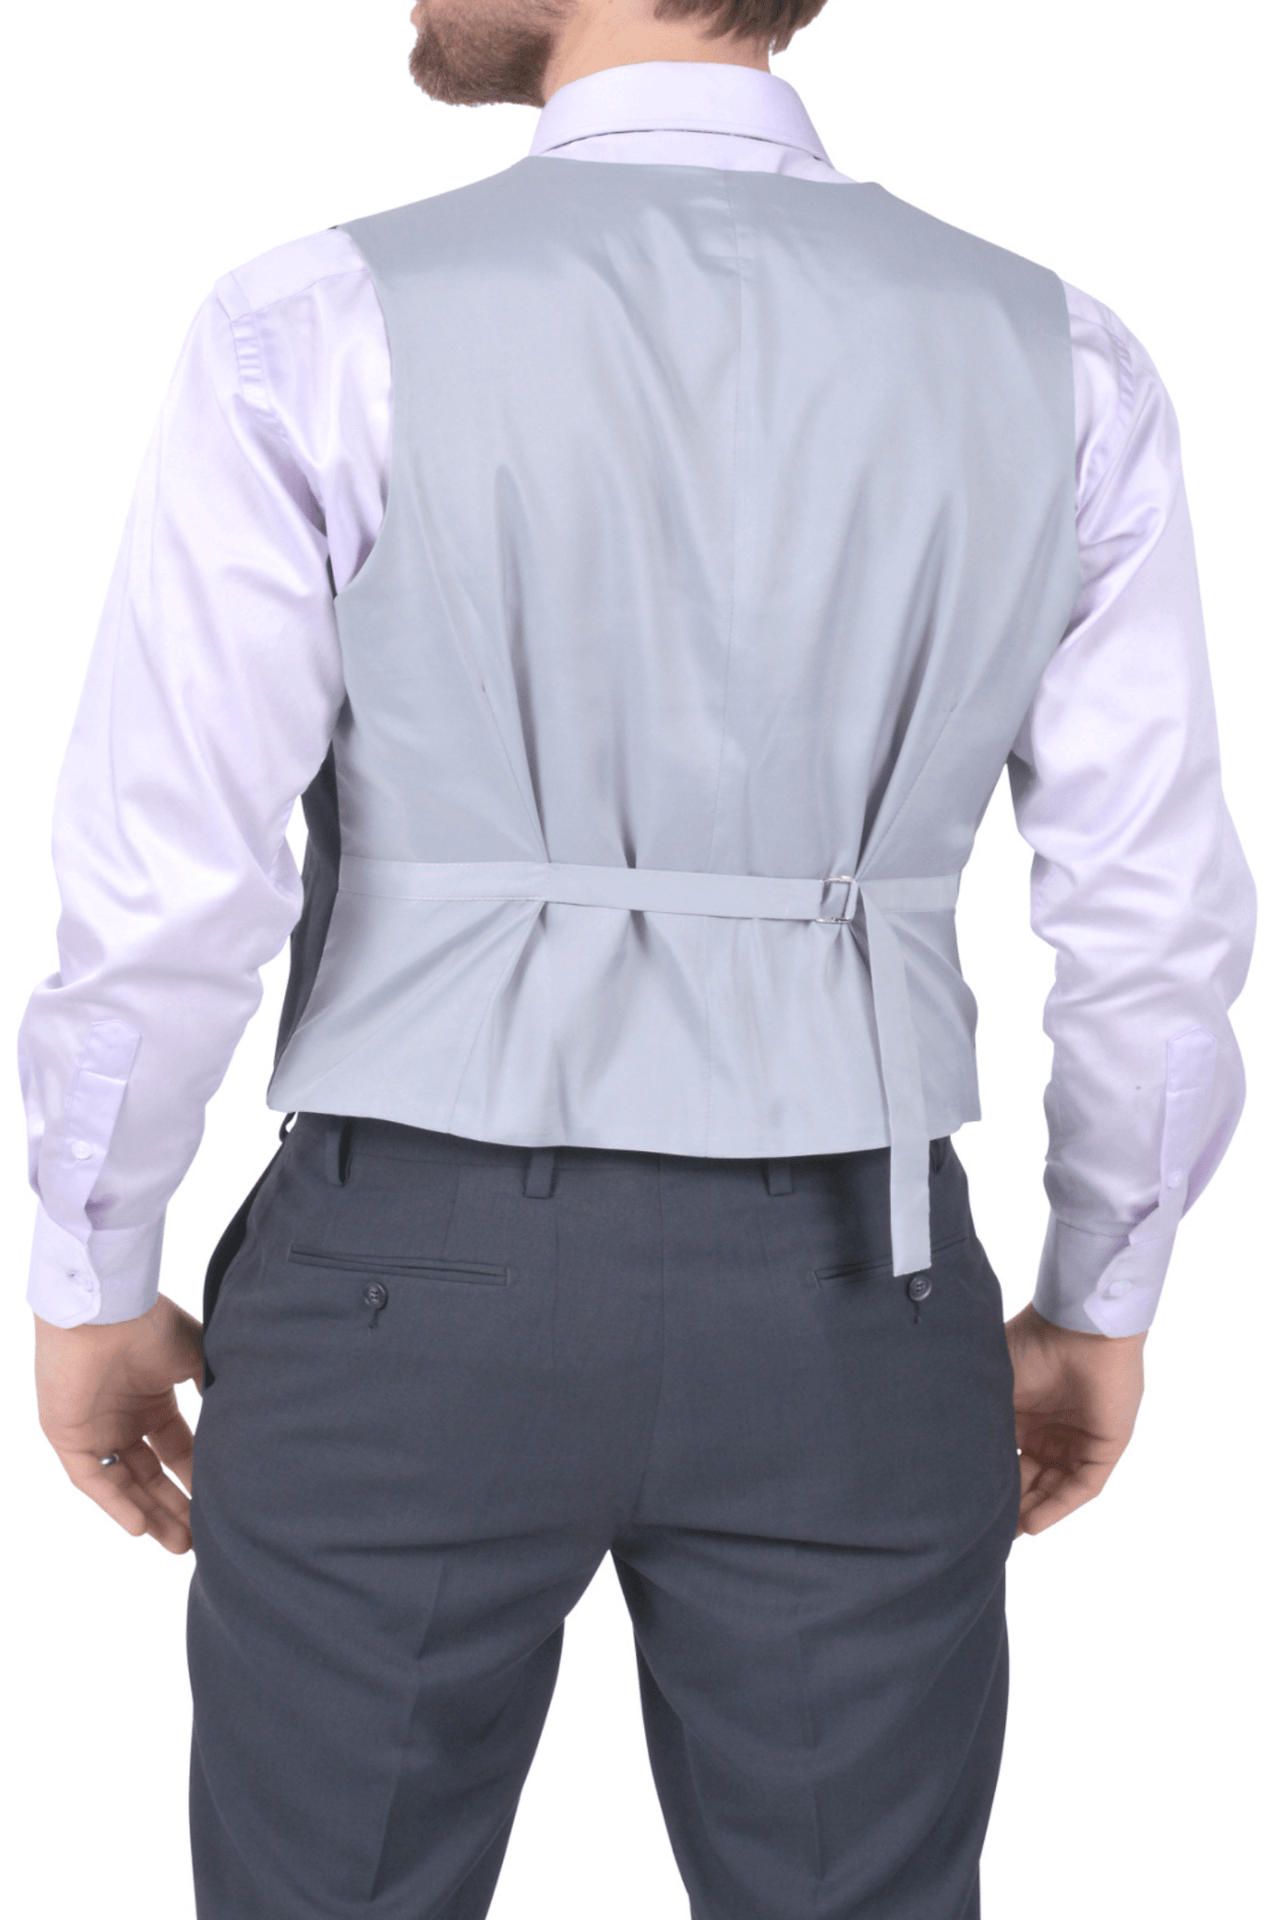 Stretch microfiber vest with embroidered logo (charcoal)